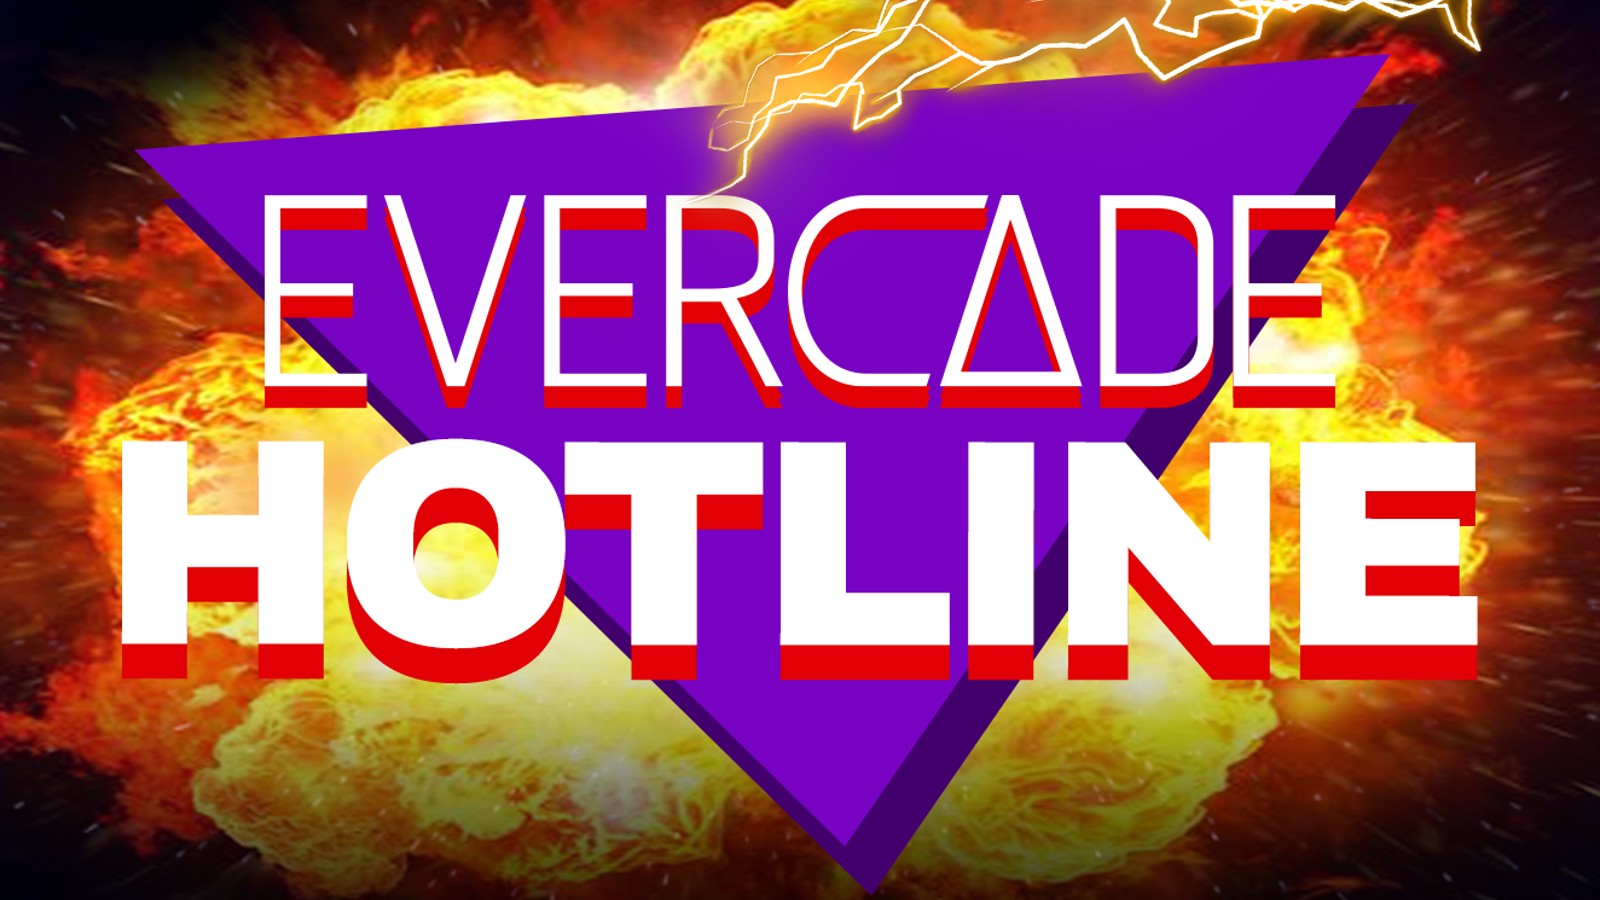 Gaming tips hotlines are back, thanks to Evercade